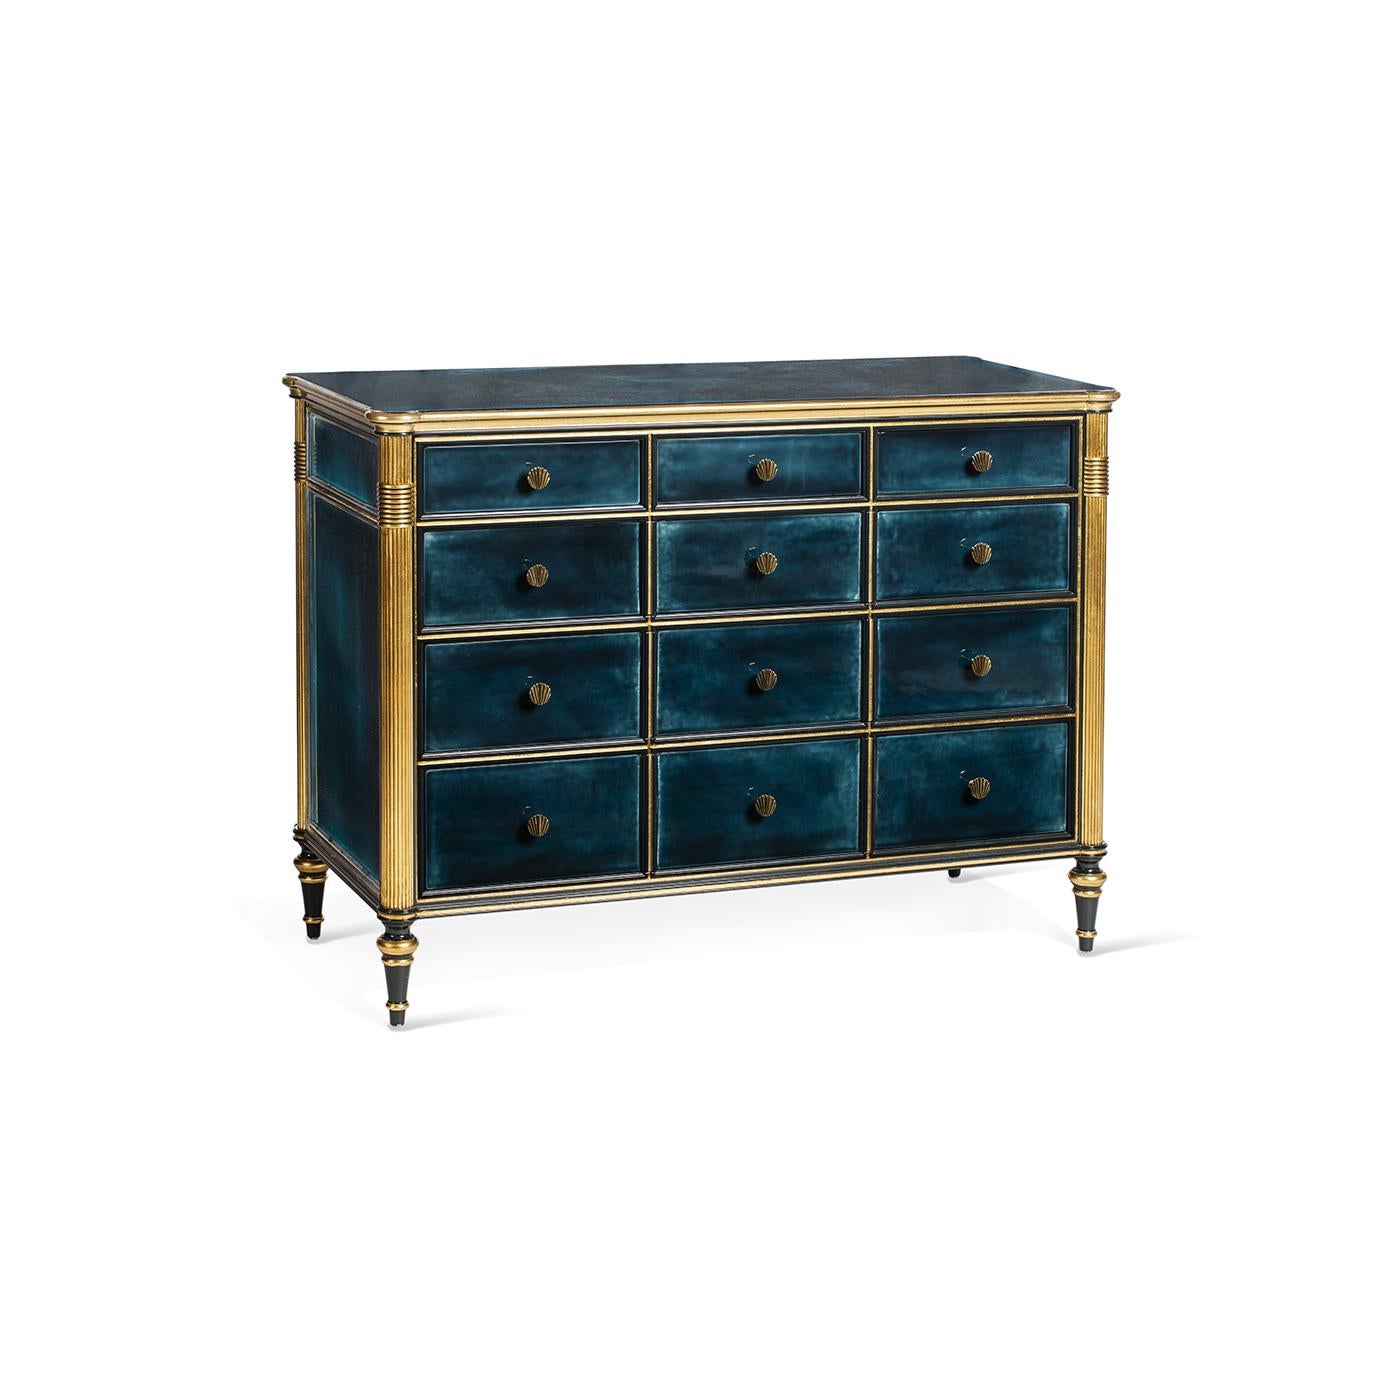 The Louis XVI Sideboard is defined by a fancy and royal appearance: the blue shades plus the ivory and gold finishes adorning it, create a delightful piece full of character and elegance. It has 6 drawers sliding on metal guides covered by Alcantara